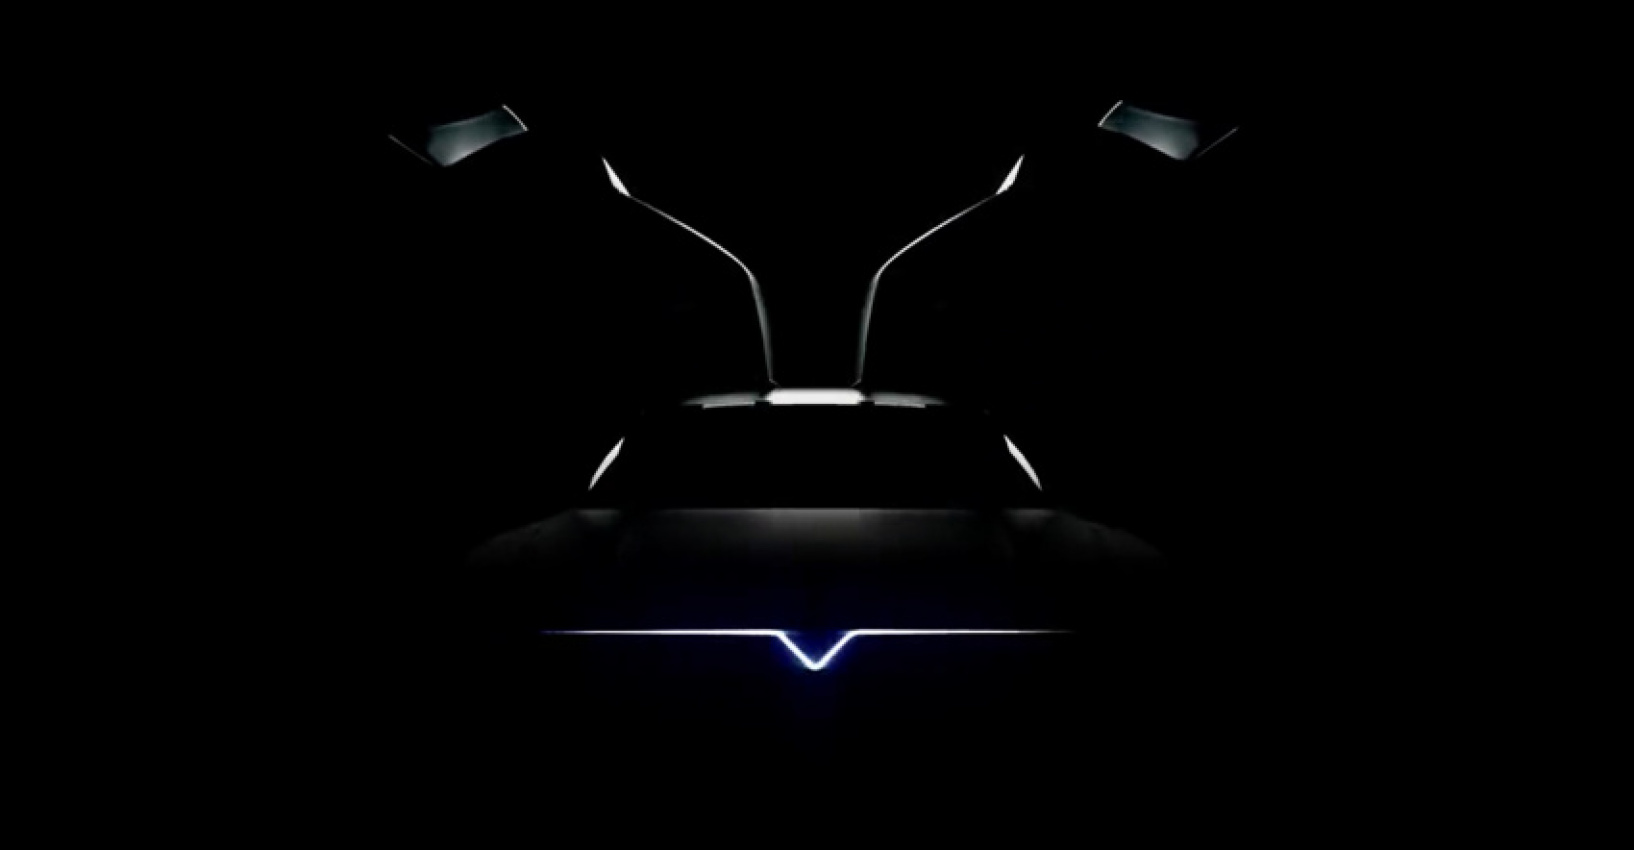 delorean, news, cars, the electric delorean debuts in august with new design — here's your first look